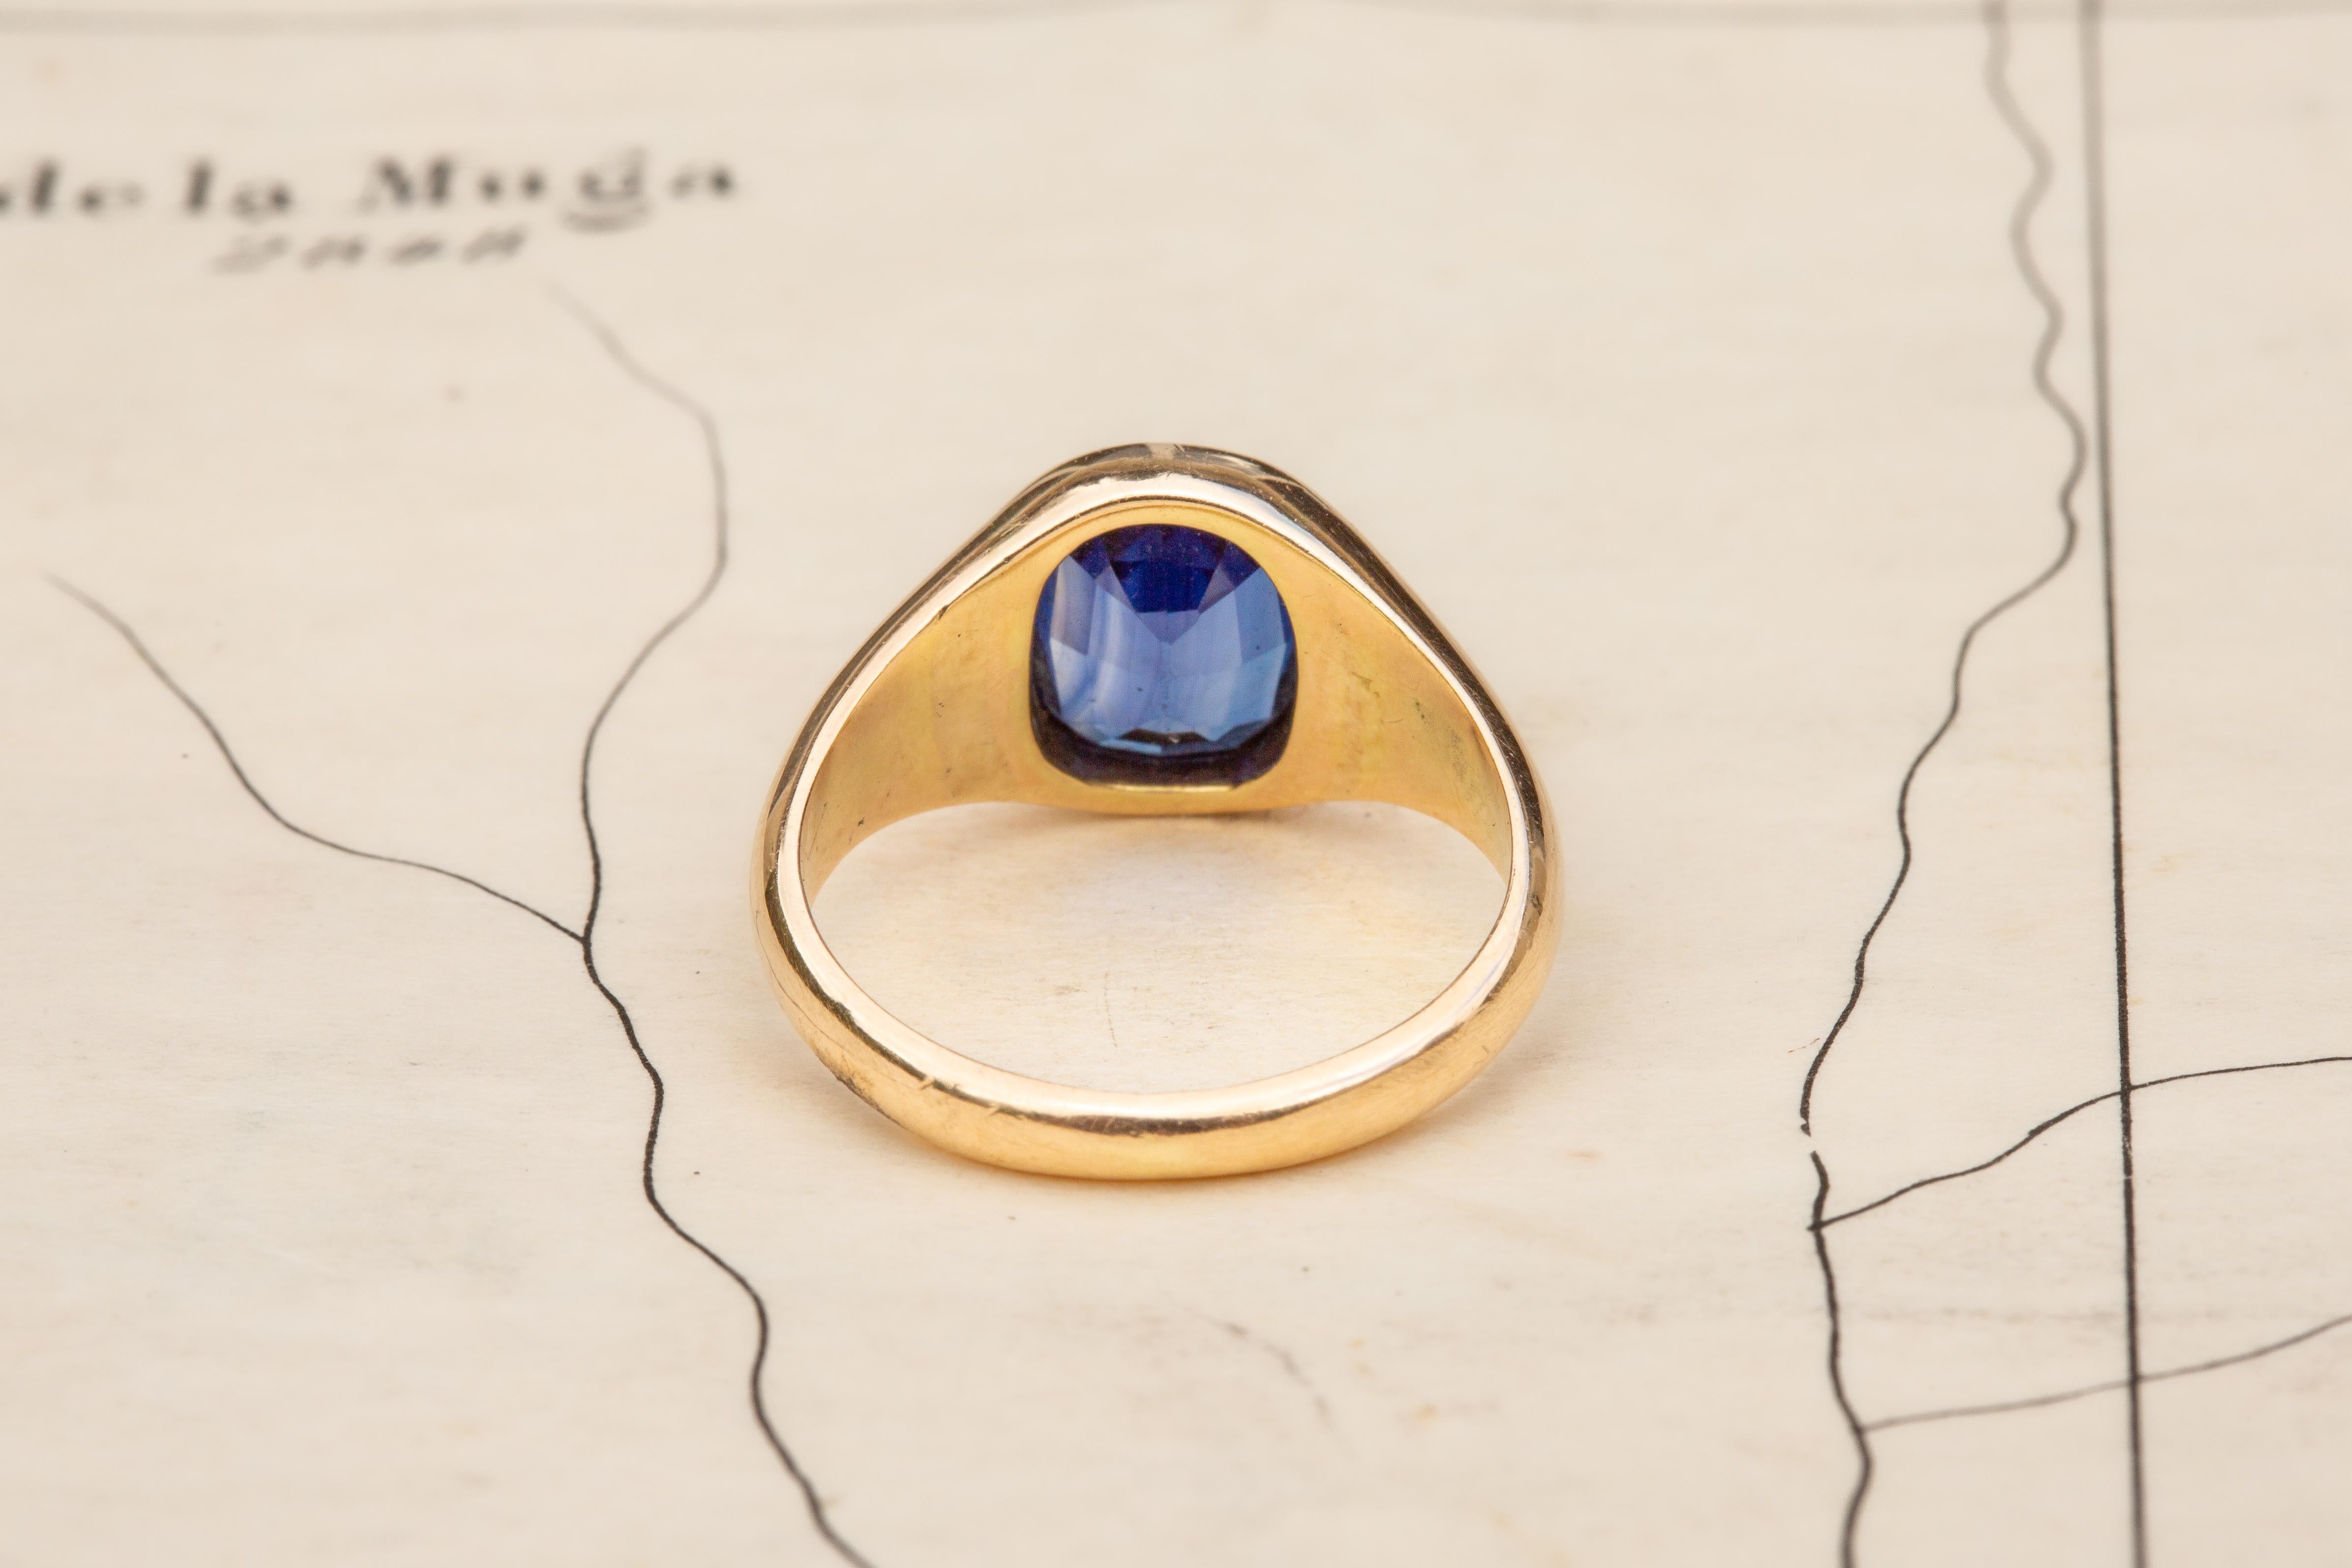 Oval Cut Antique Vintage 14k Gold Sapphire Solitaire Signet Ring, Midcentury, 1940s